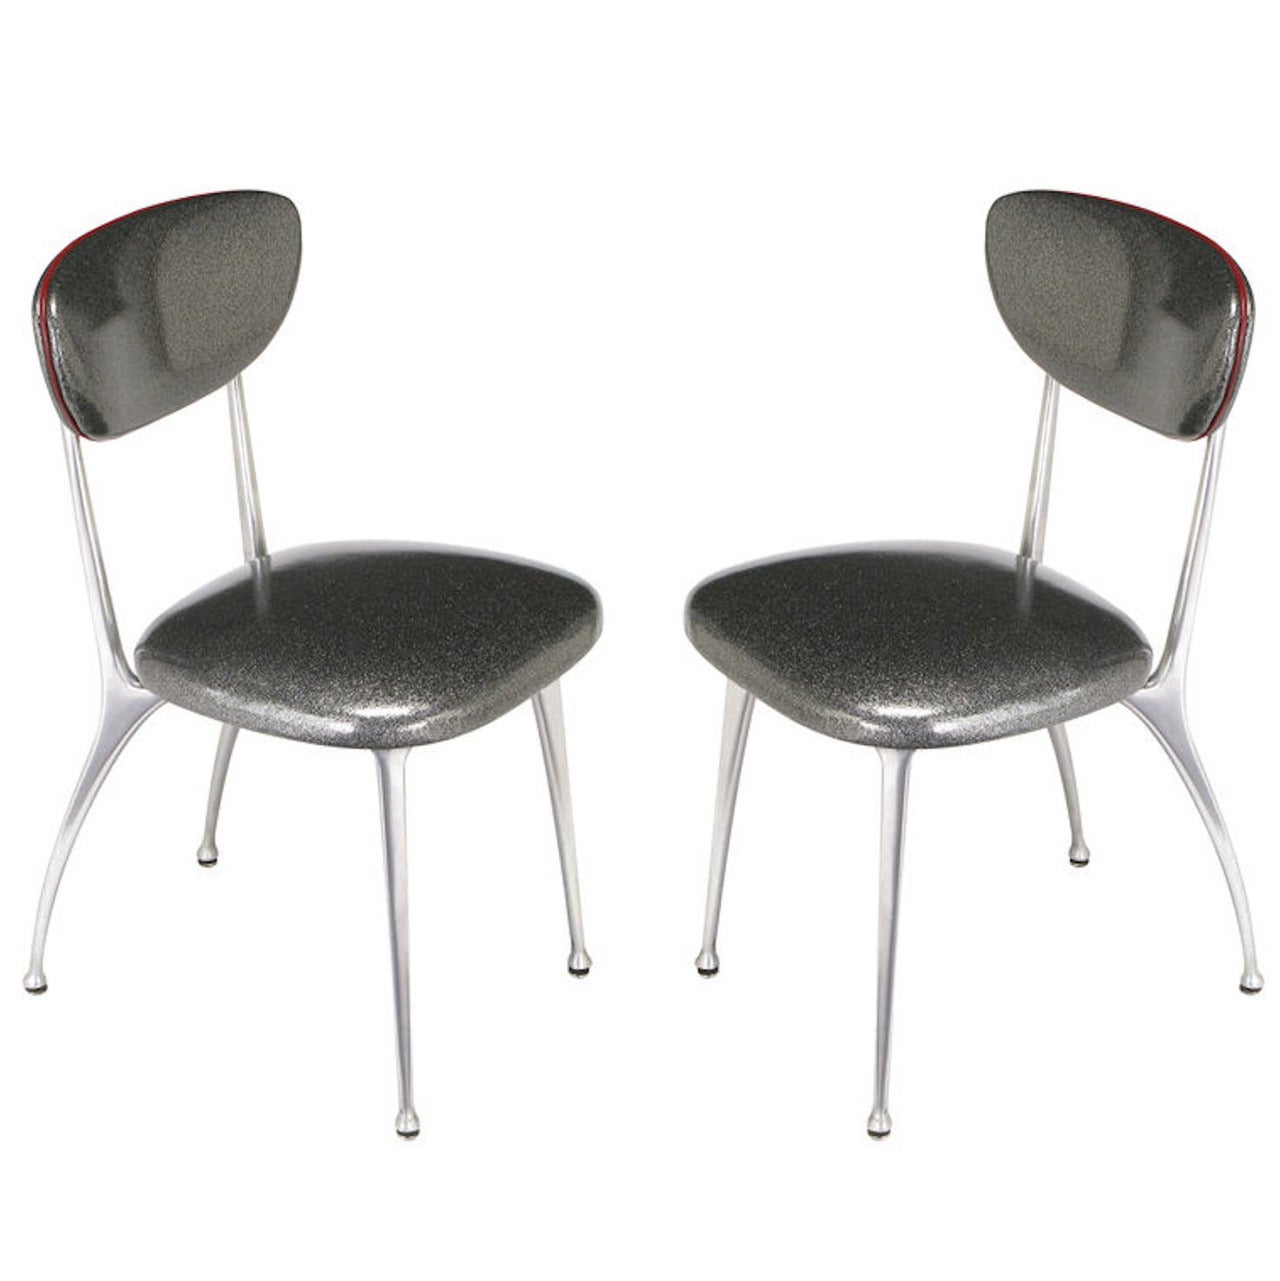 Pair of 1950s Shelby Williams Polished Aluminum Gazelle Side Chairs For Sale